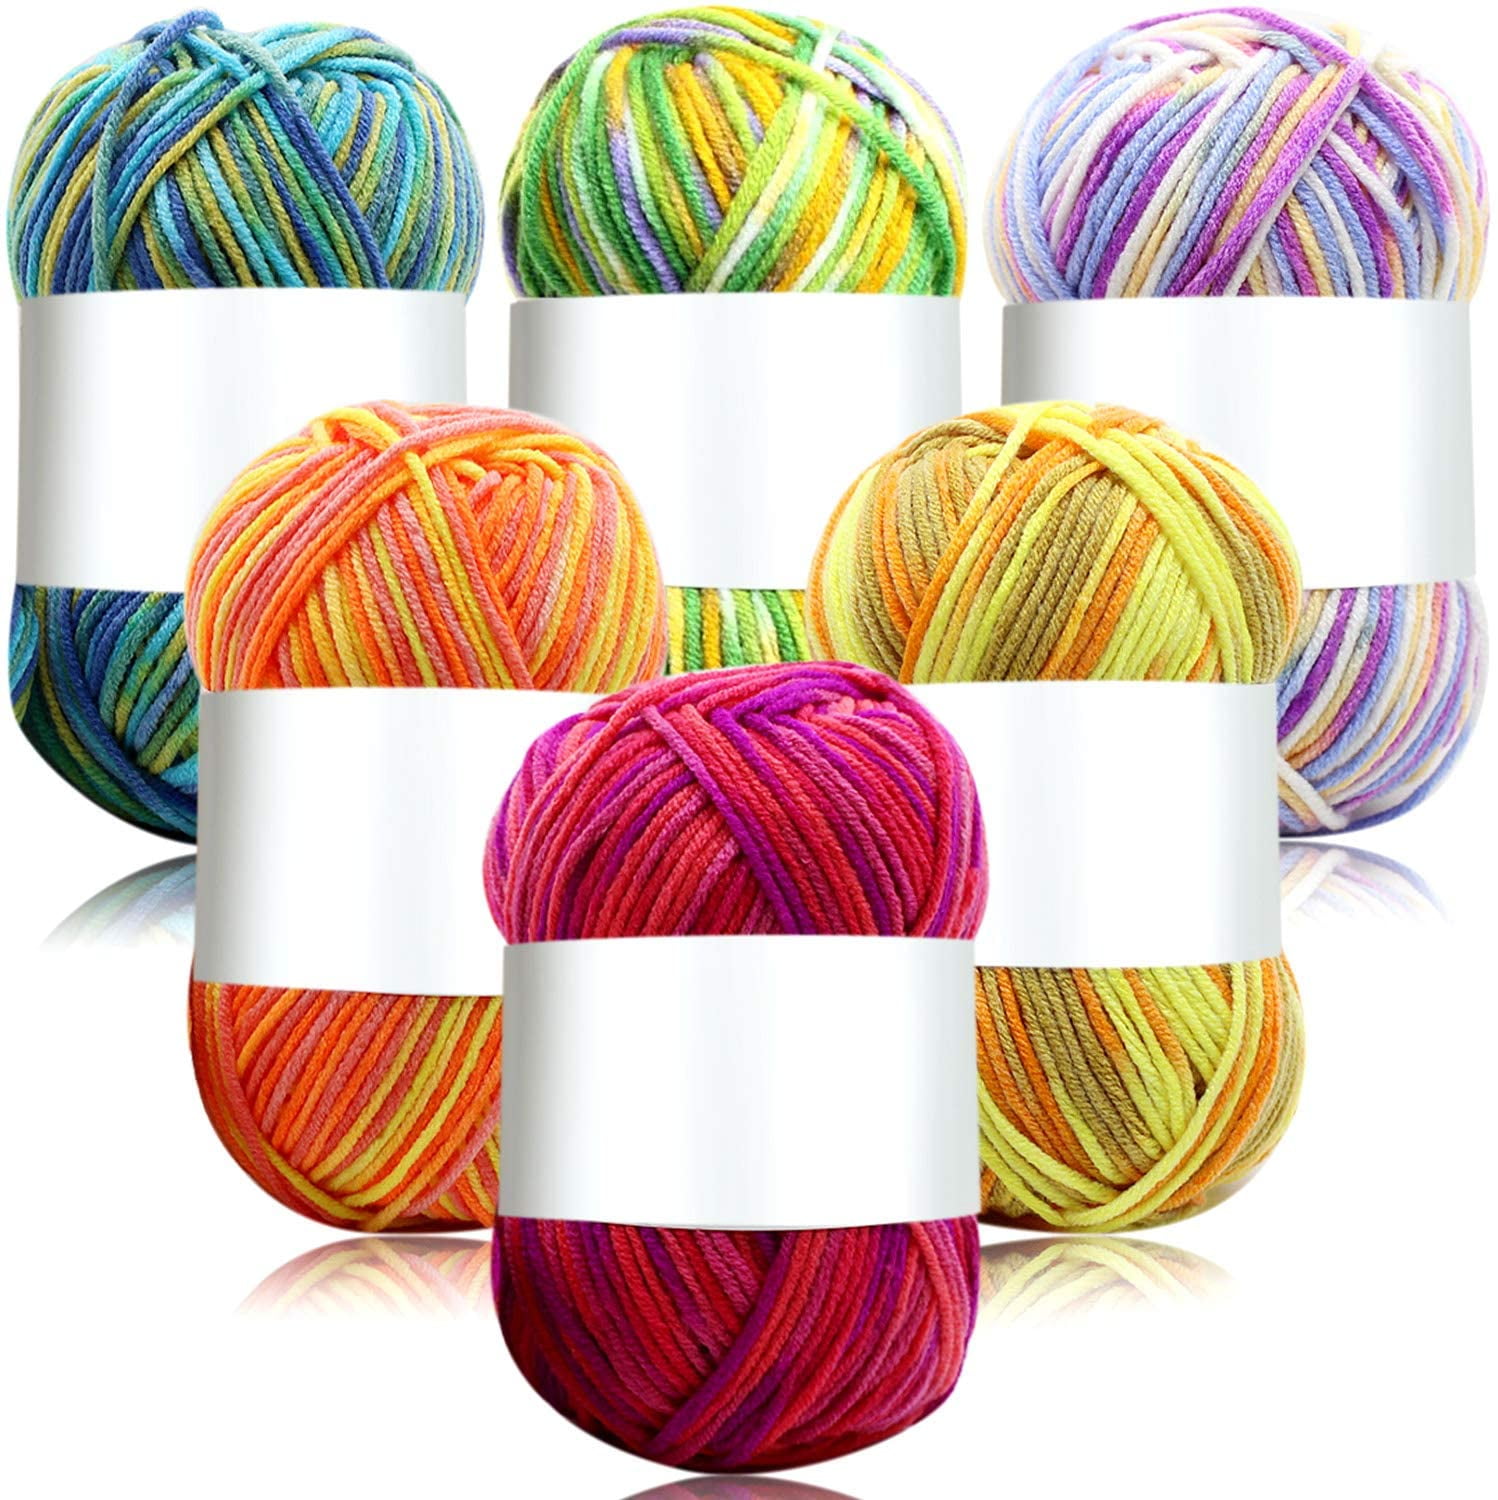 6 Pieces 50 g Crochet Yarn Multi-Colored Acrylic Knitting Yarn Hand  Knitting Yarn Weaving Yarn Crochet Thread (Pink, Yellow Green Pink,  Assorted Color, Rainbow, Yellow Blue Pink, Yellow Red)(B) 